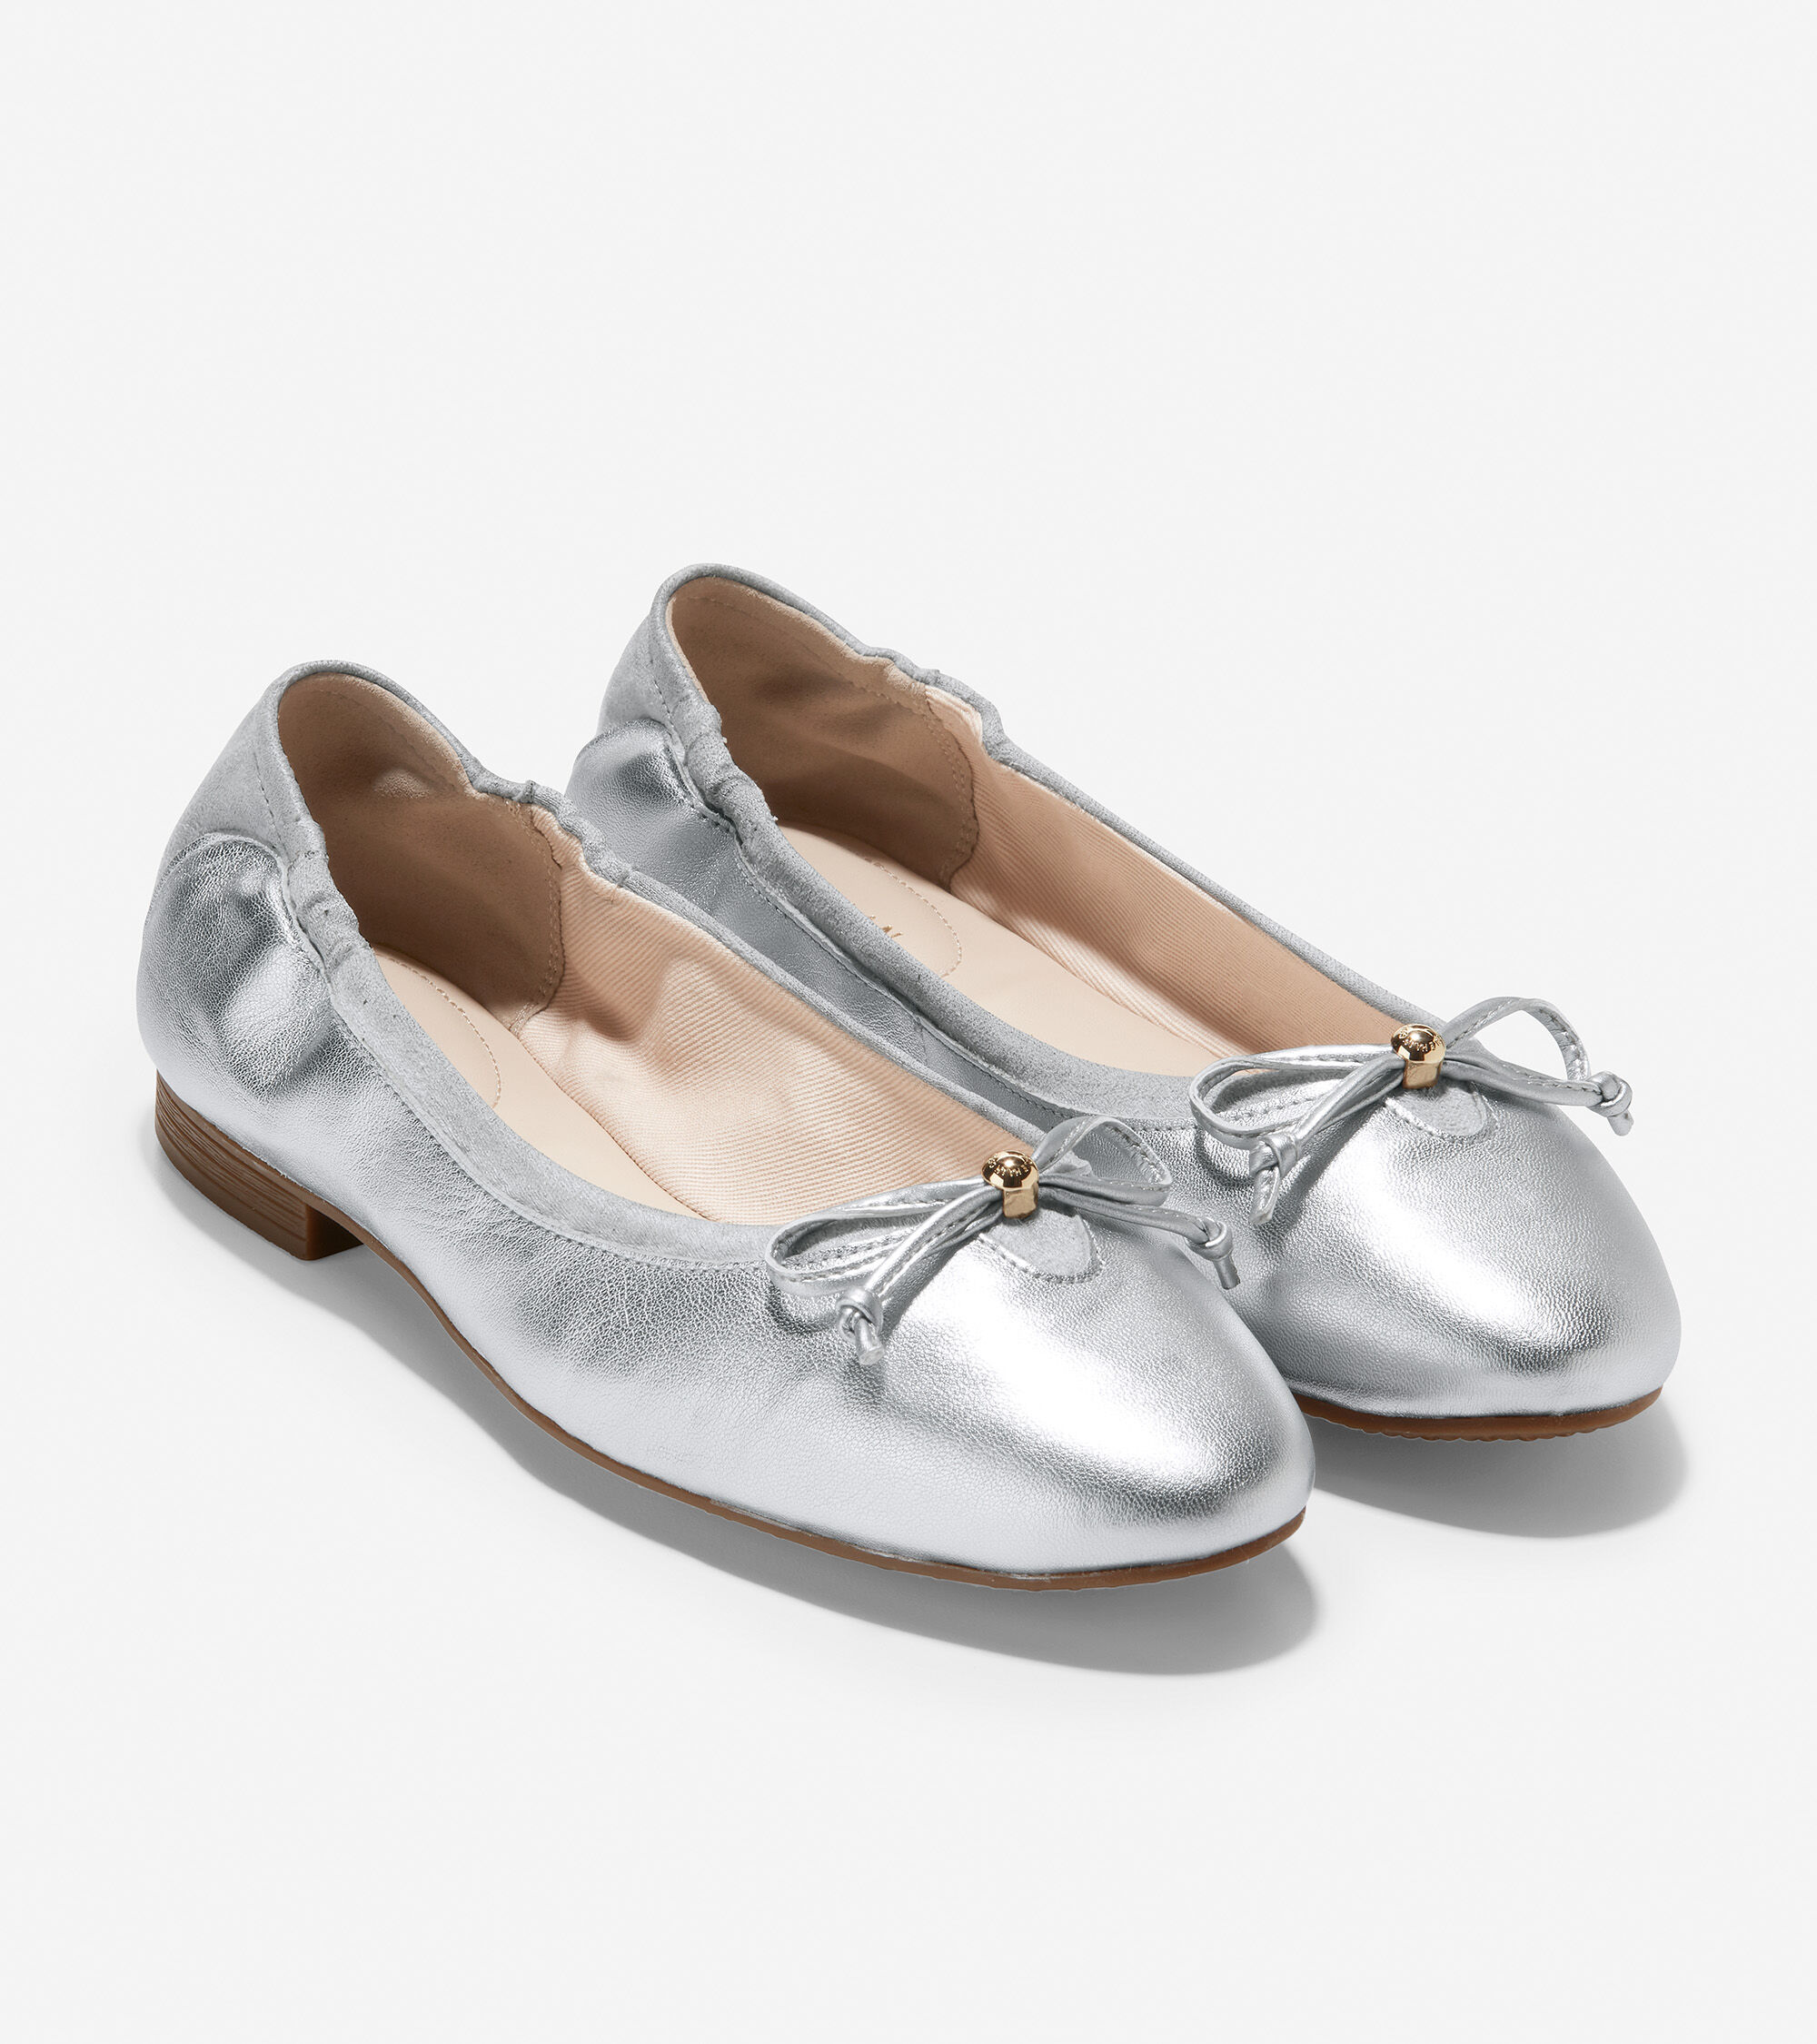 Women's Keira Ballet Flat in Soft Silver Leather | Cole Haan